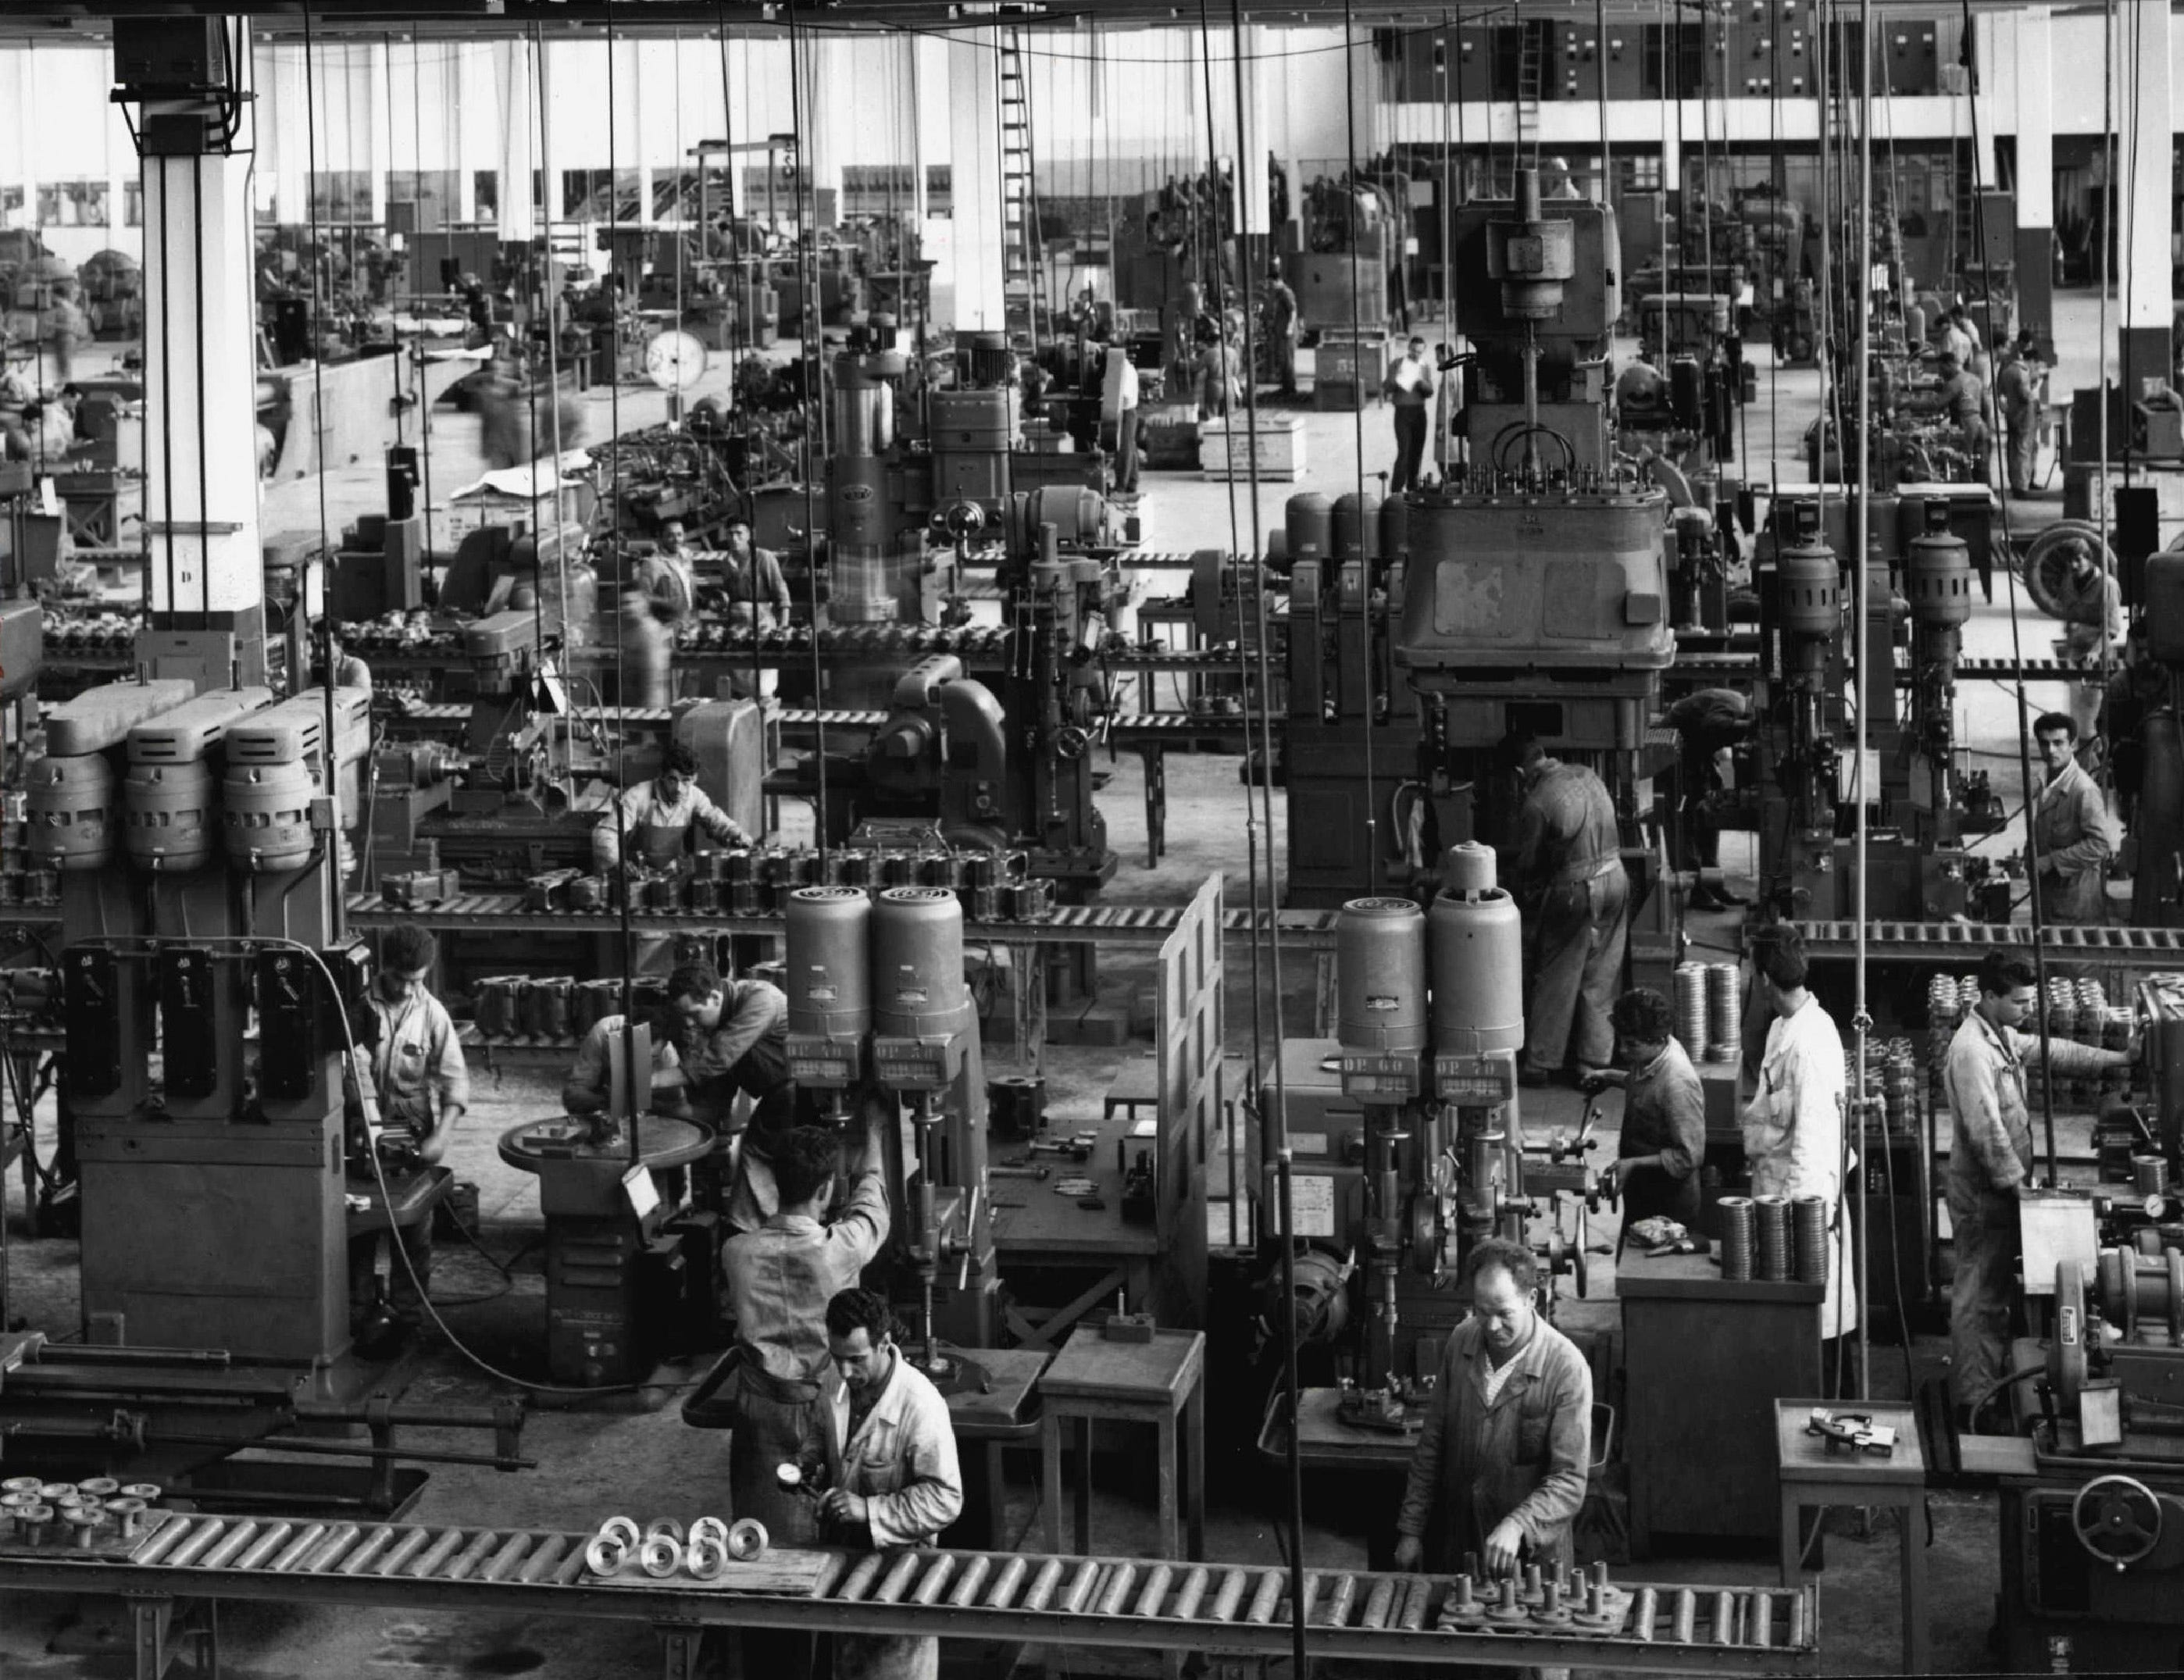 Detroit or Flint? Neither. Shown is a partial view of the B.H. Willys Overland do Brasil Axle and Transmission plant in Sao Paule, Brazil, March 25, 1962. In the foreground, machining of differential cases and gear and trasfer boxes. In the background, section for machining of castings.